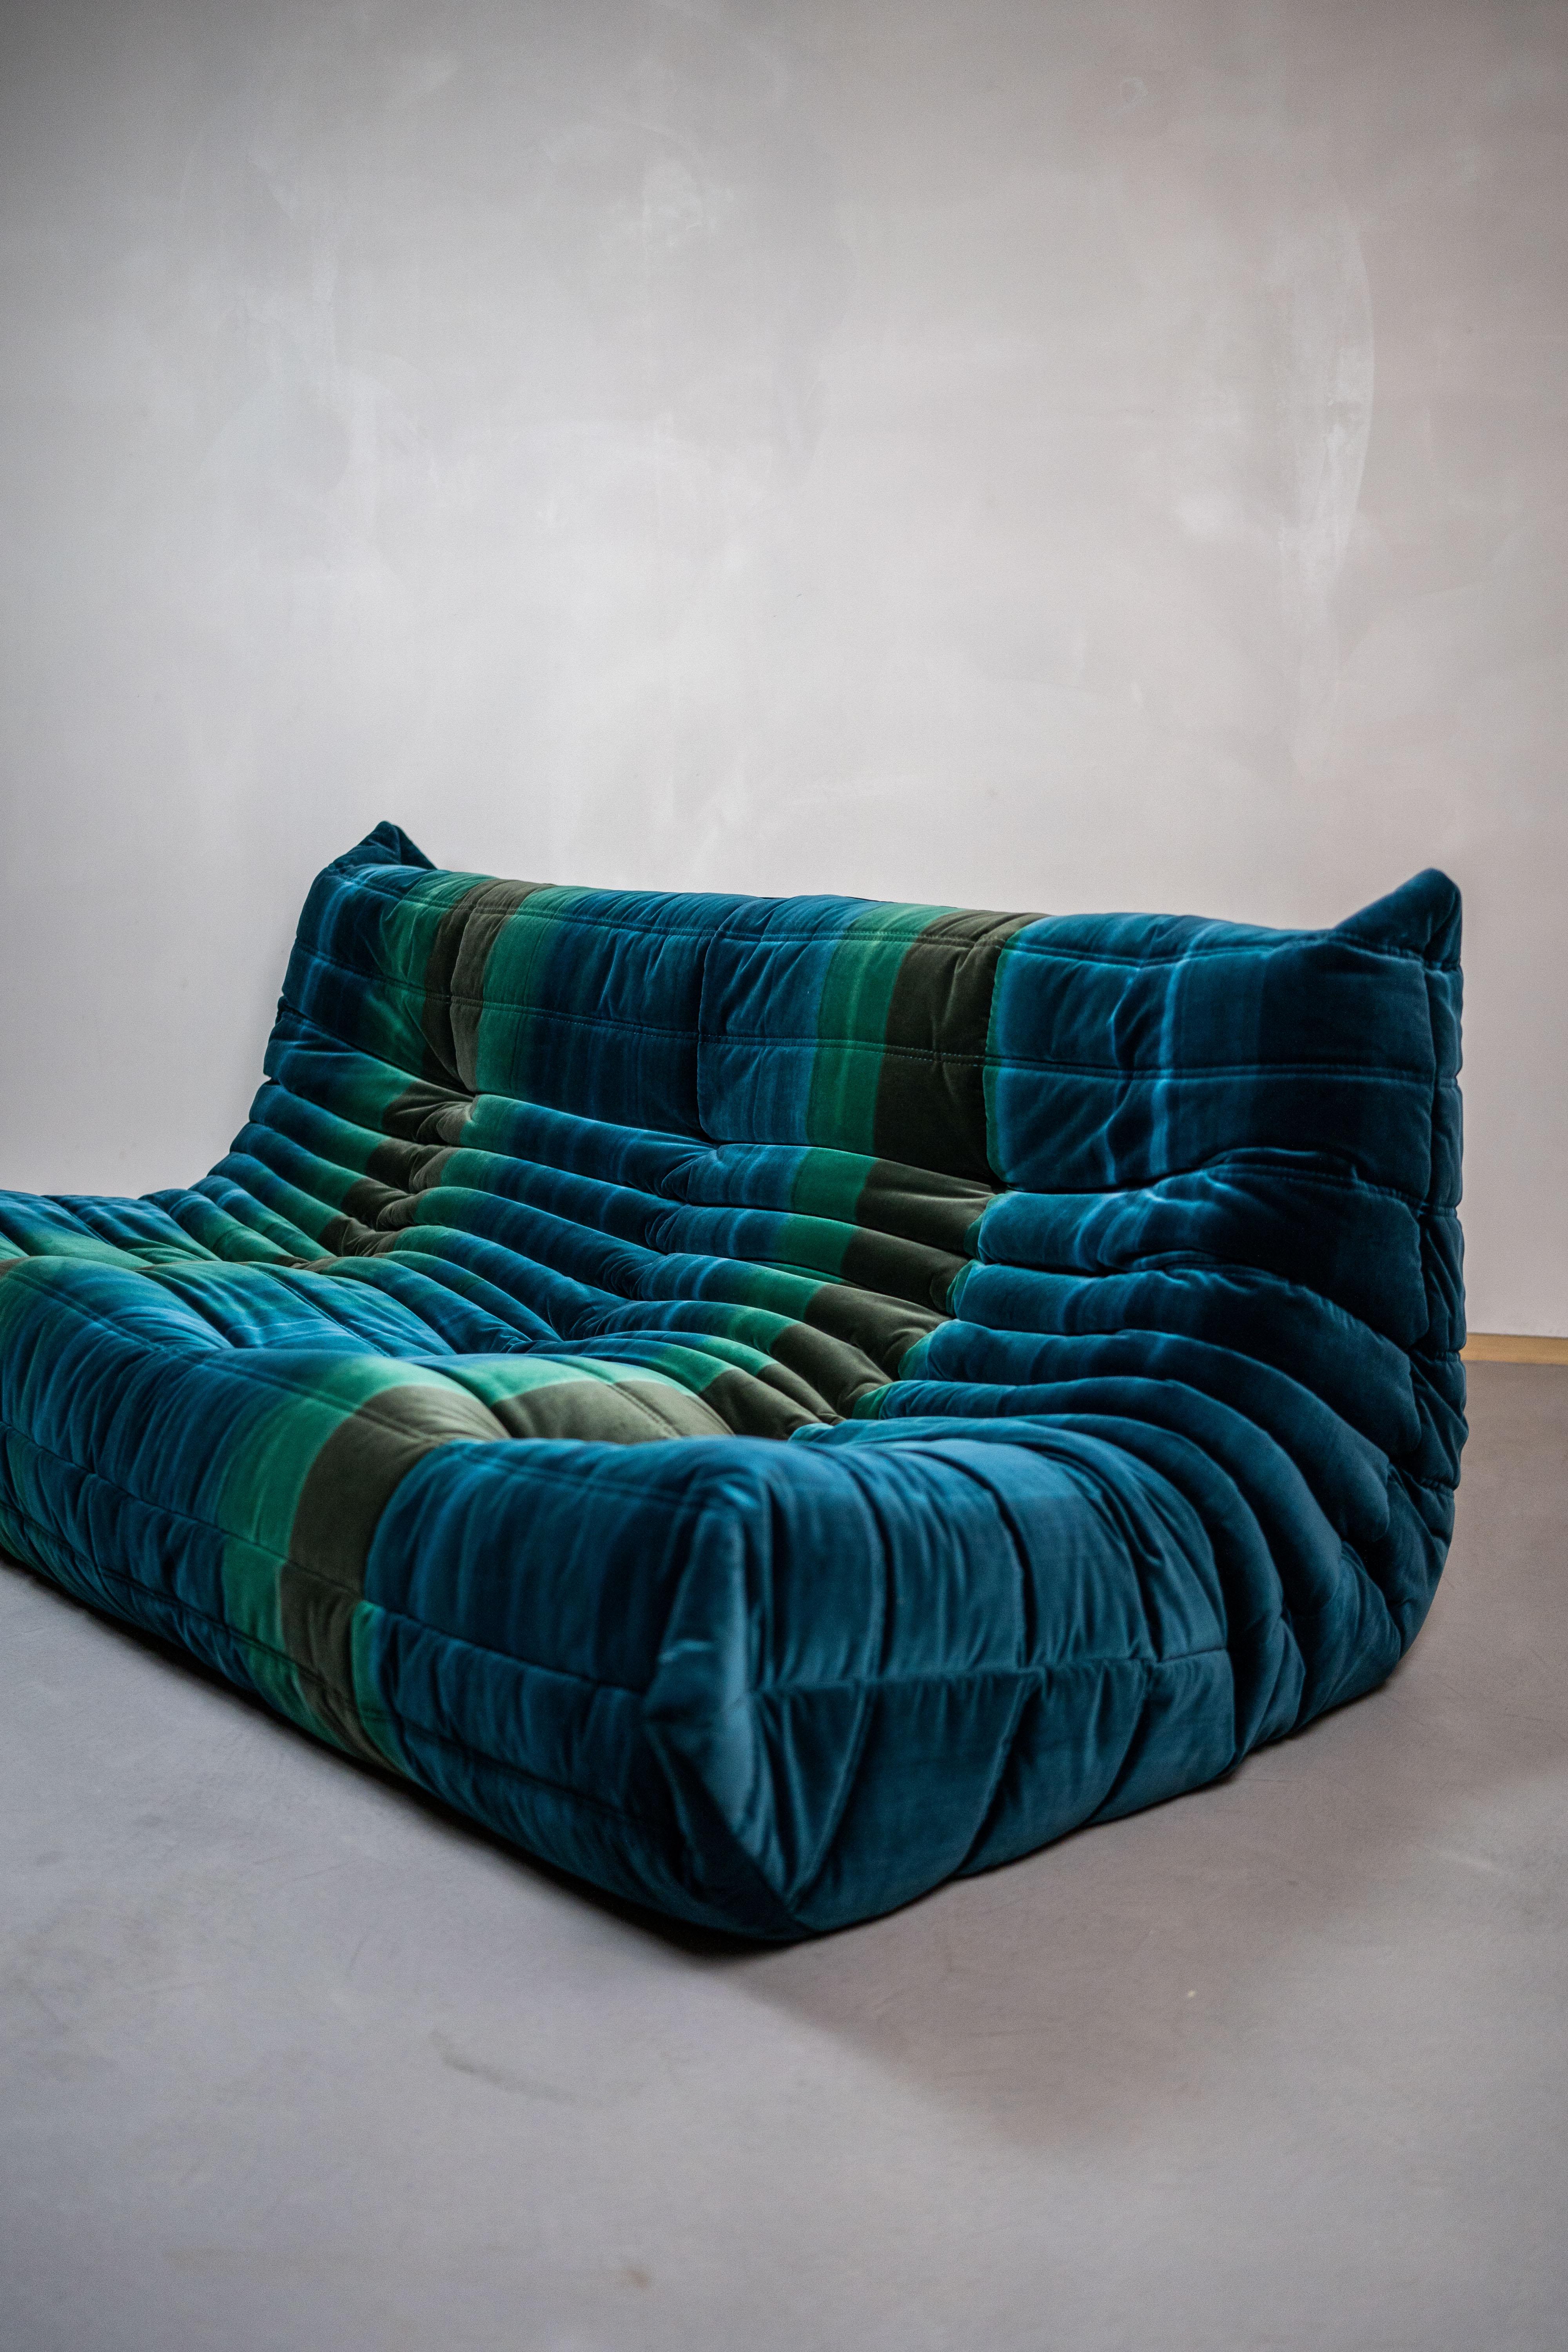 Togo sofa in velvet by Michel Ducaroy for Ligne Roset
The designer was inspired by the tooth paste tube
Three seater sofa, upholstered in soft and smooth vetvet. The colour and and patern are unique. It is green, blue and turquiase stripes. 
The